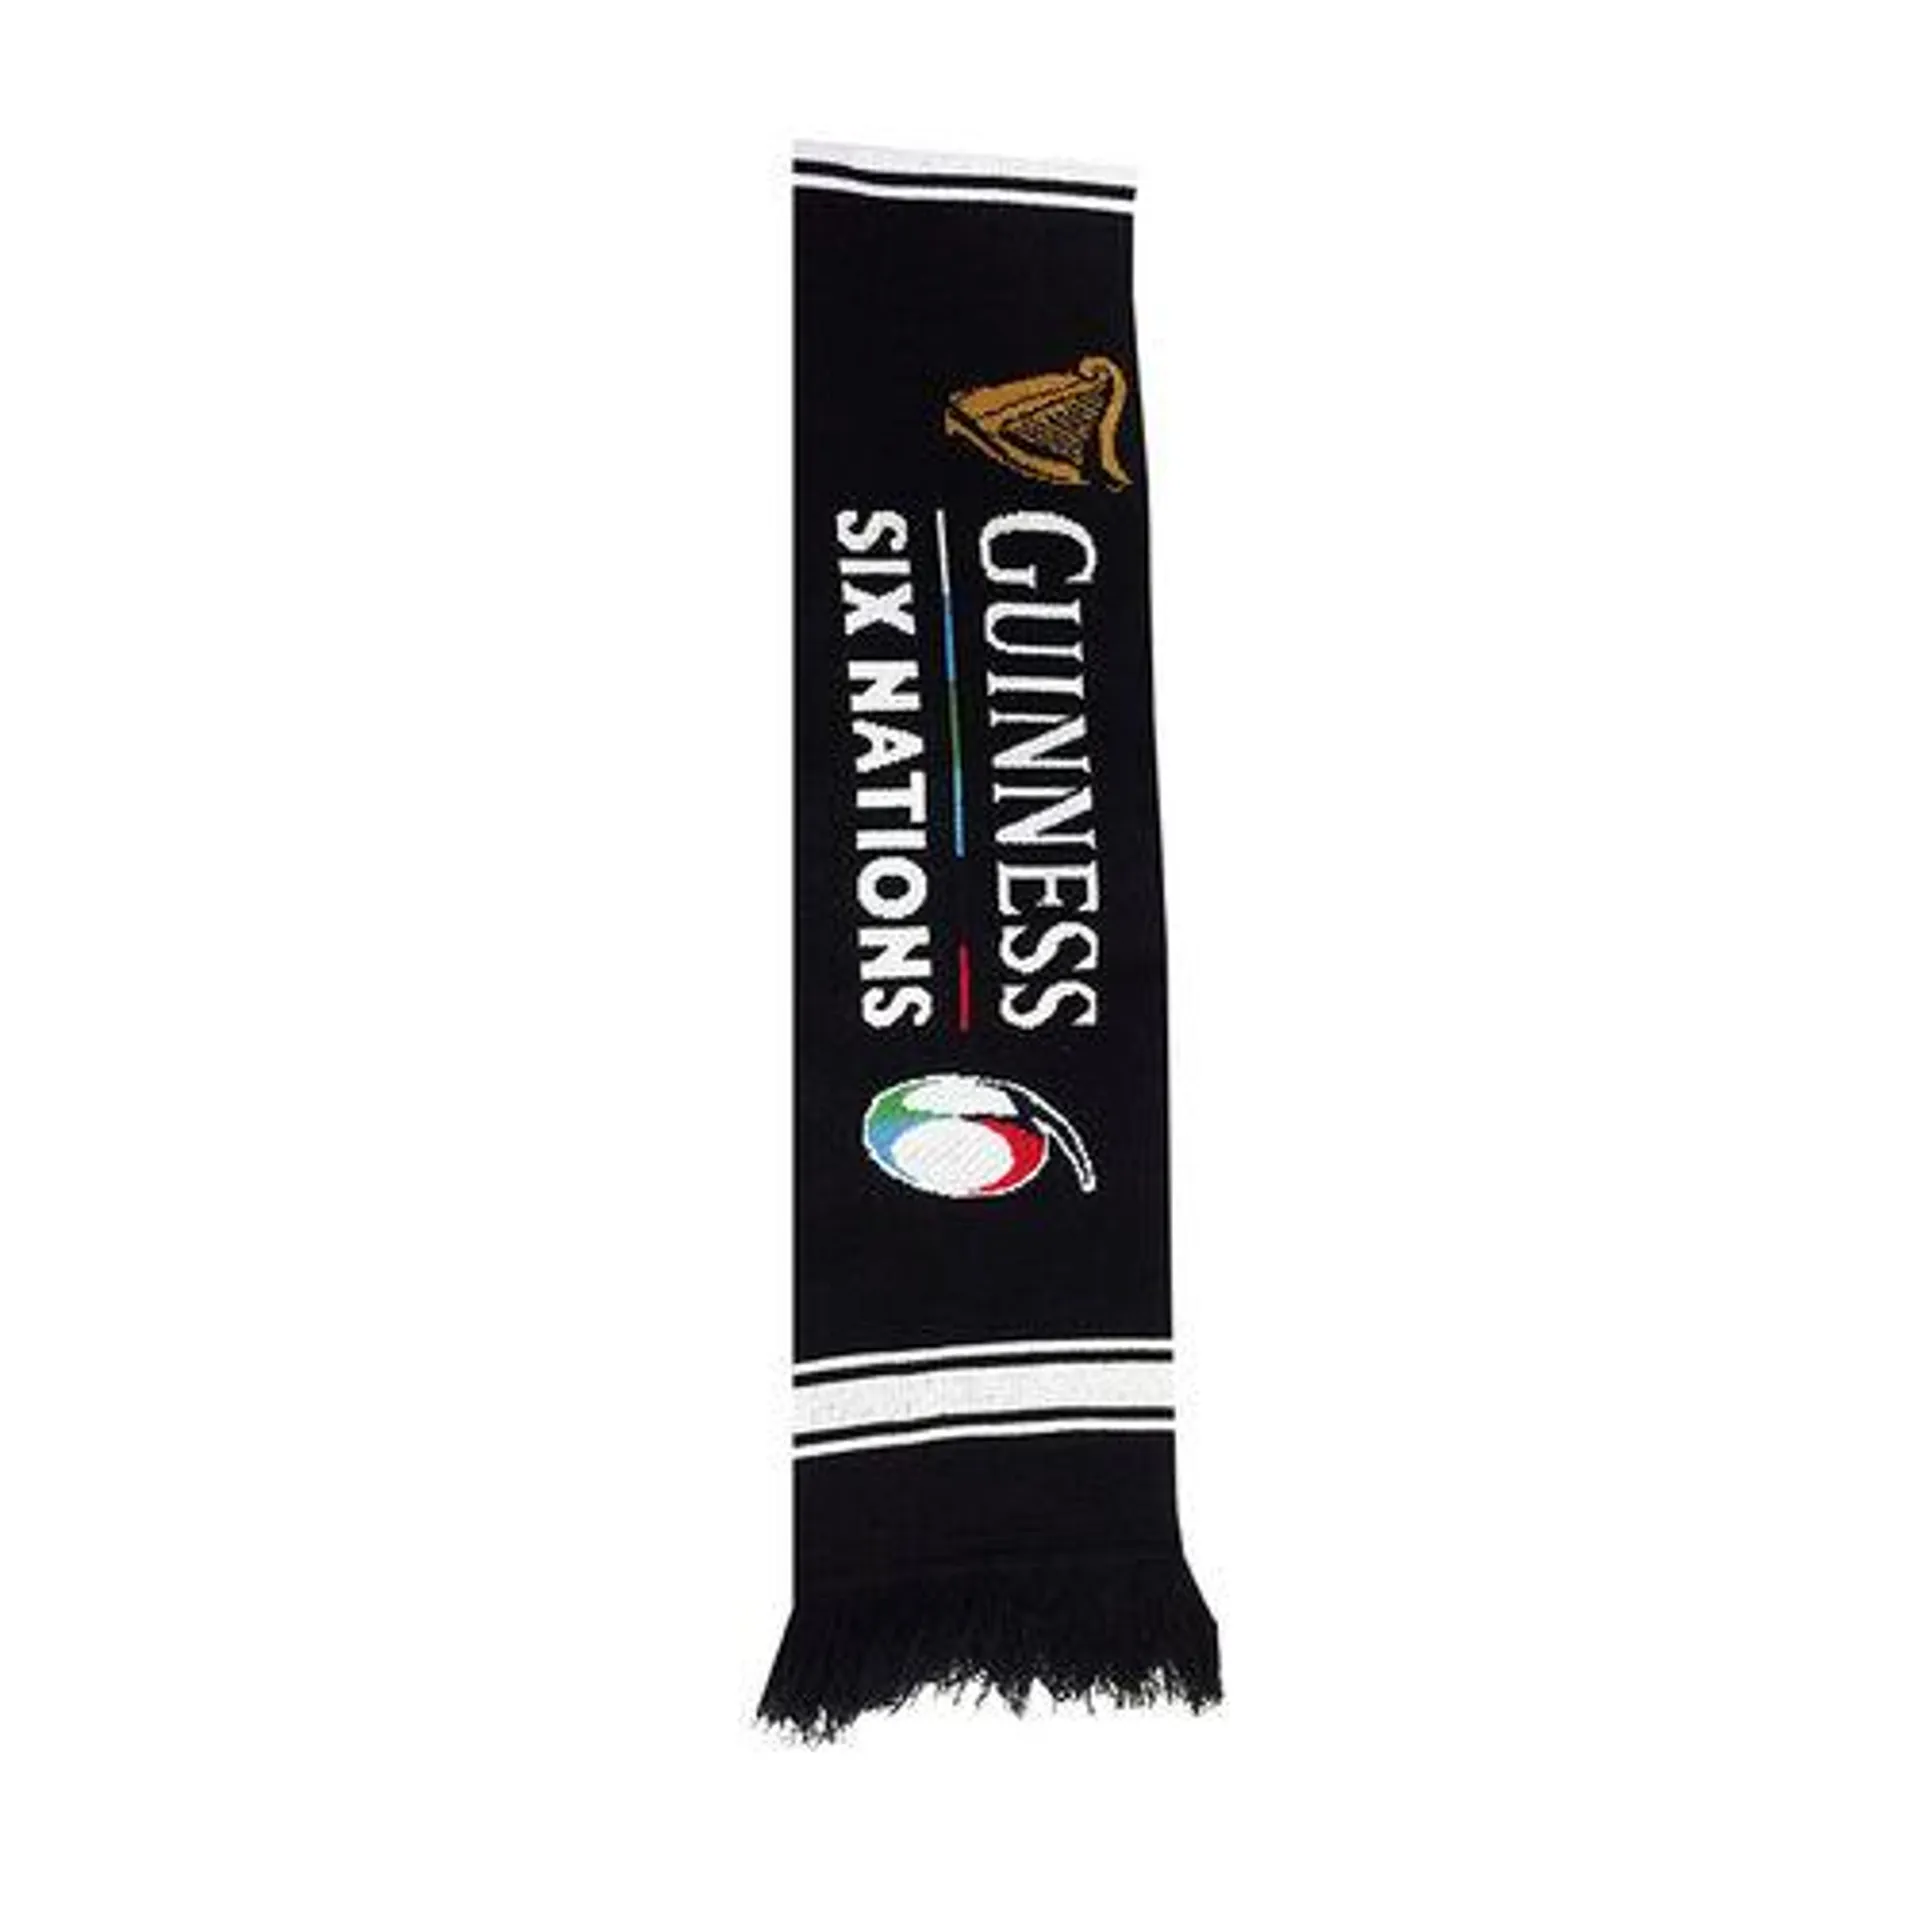 Black 6 Nations Knit Scarf One Size